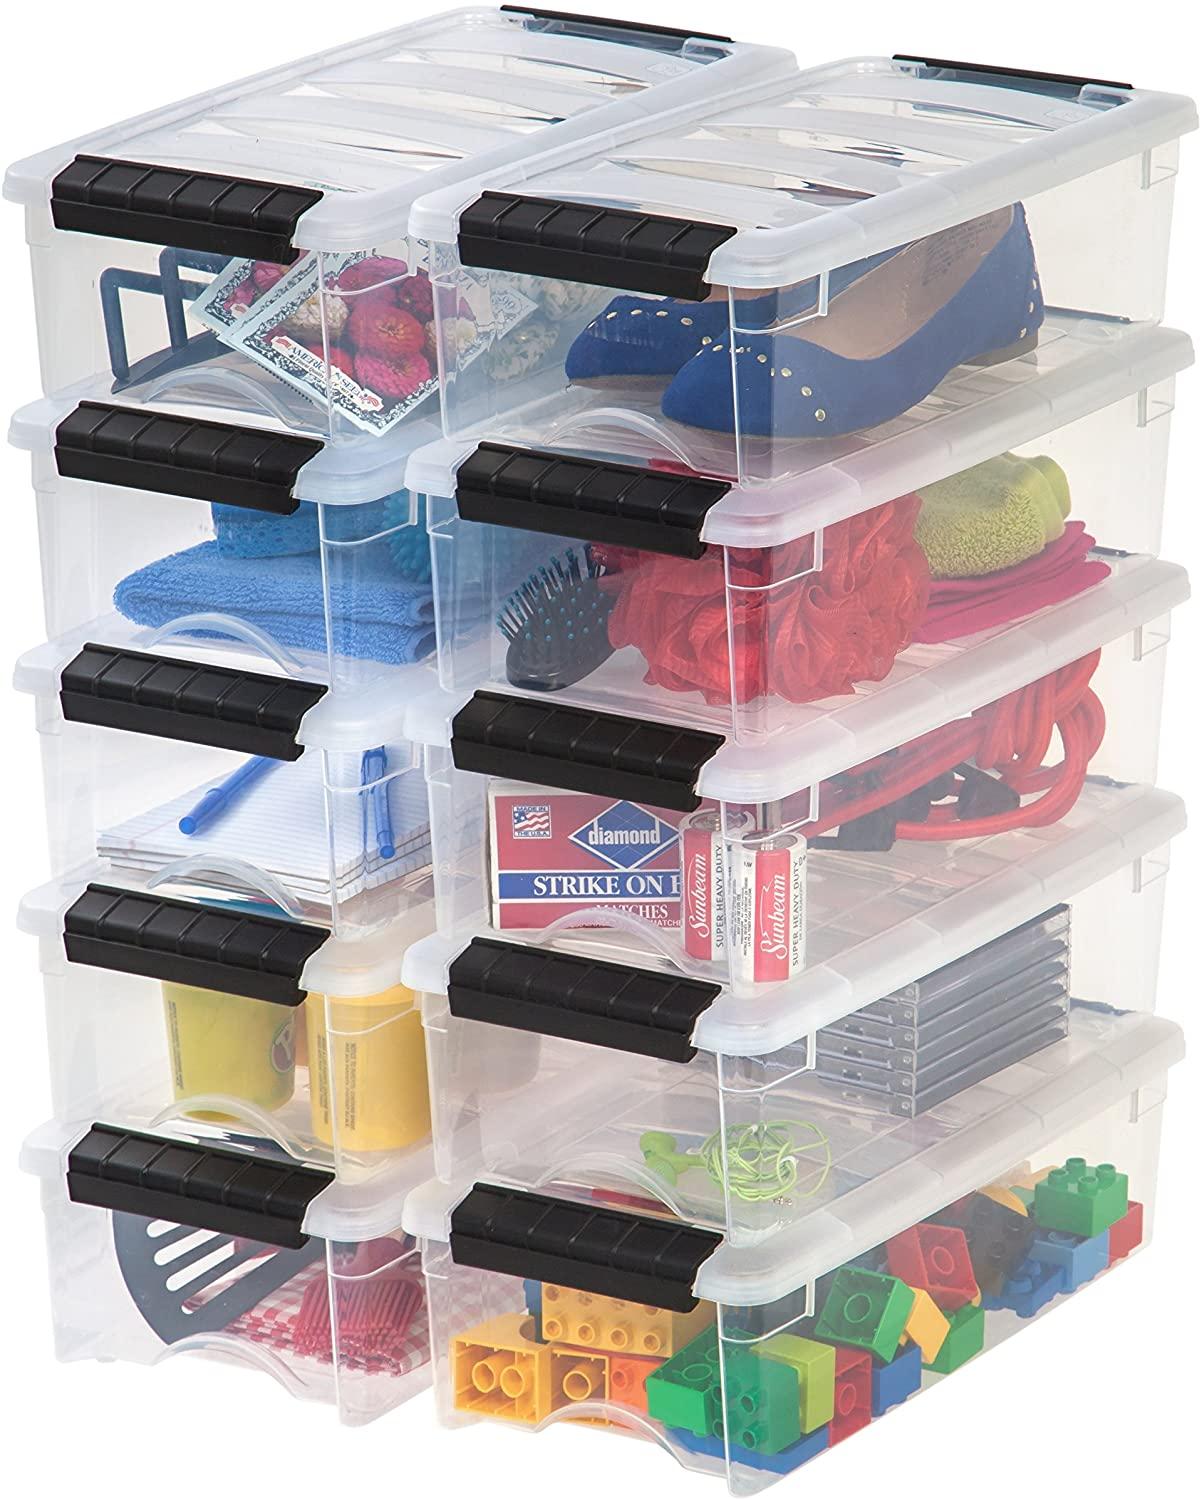 https://www.dontwasteyourmoney.com/wp-content/uploads/2022/04/iris-usa-clear-stackable-small-plastic-storage-bins-10-piece-small-plastic-storage-bins.jpg